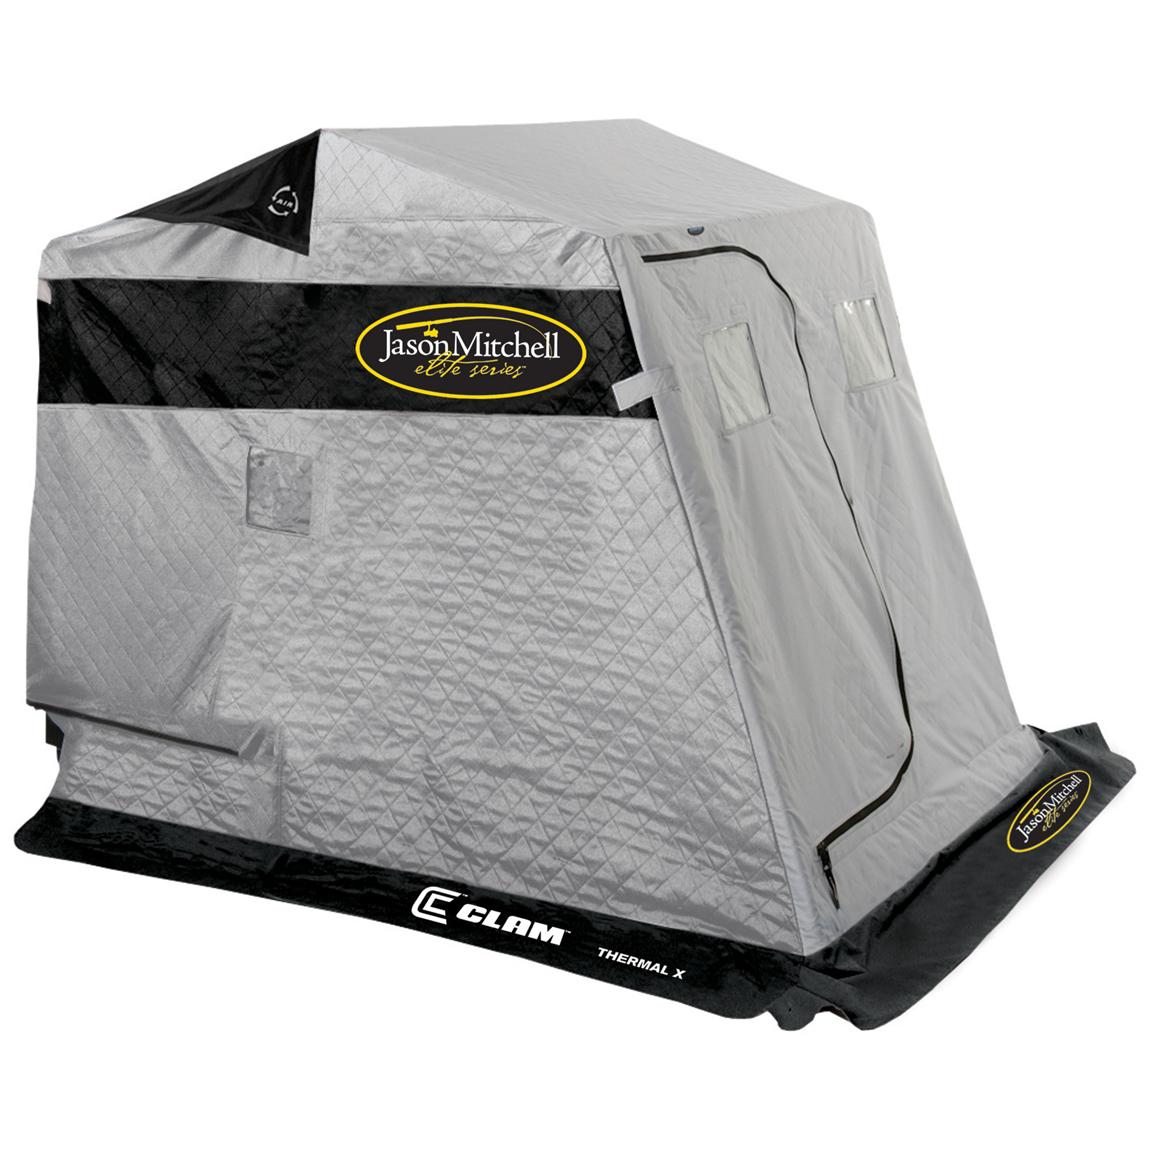 Clam™ Jason Mitchell Thermal X 2-person Ice Shelter ...